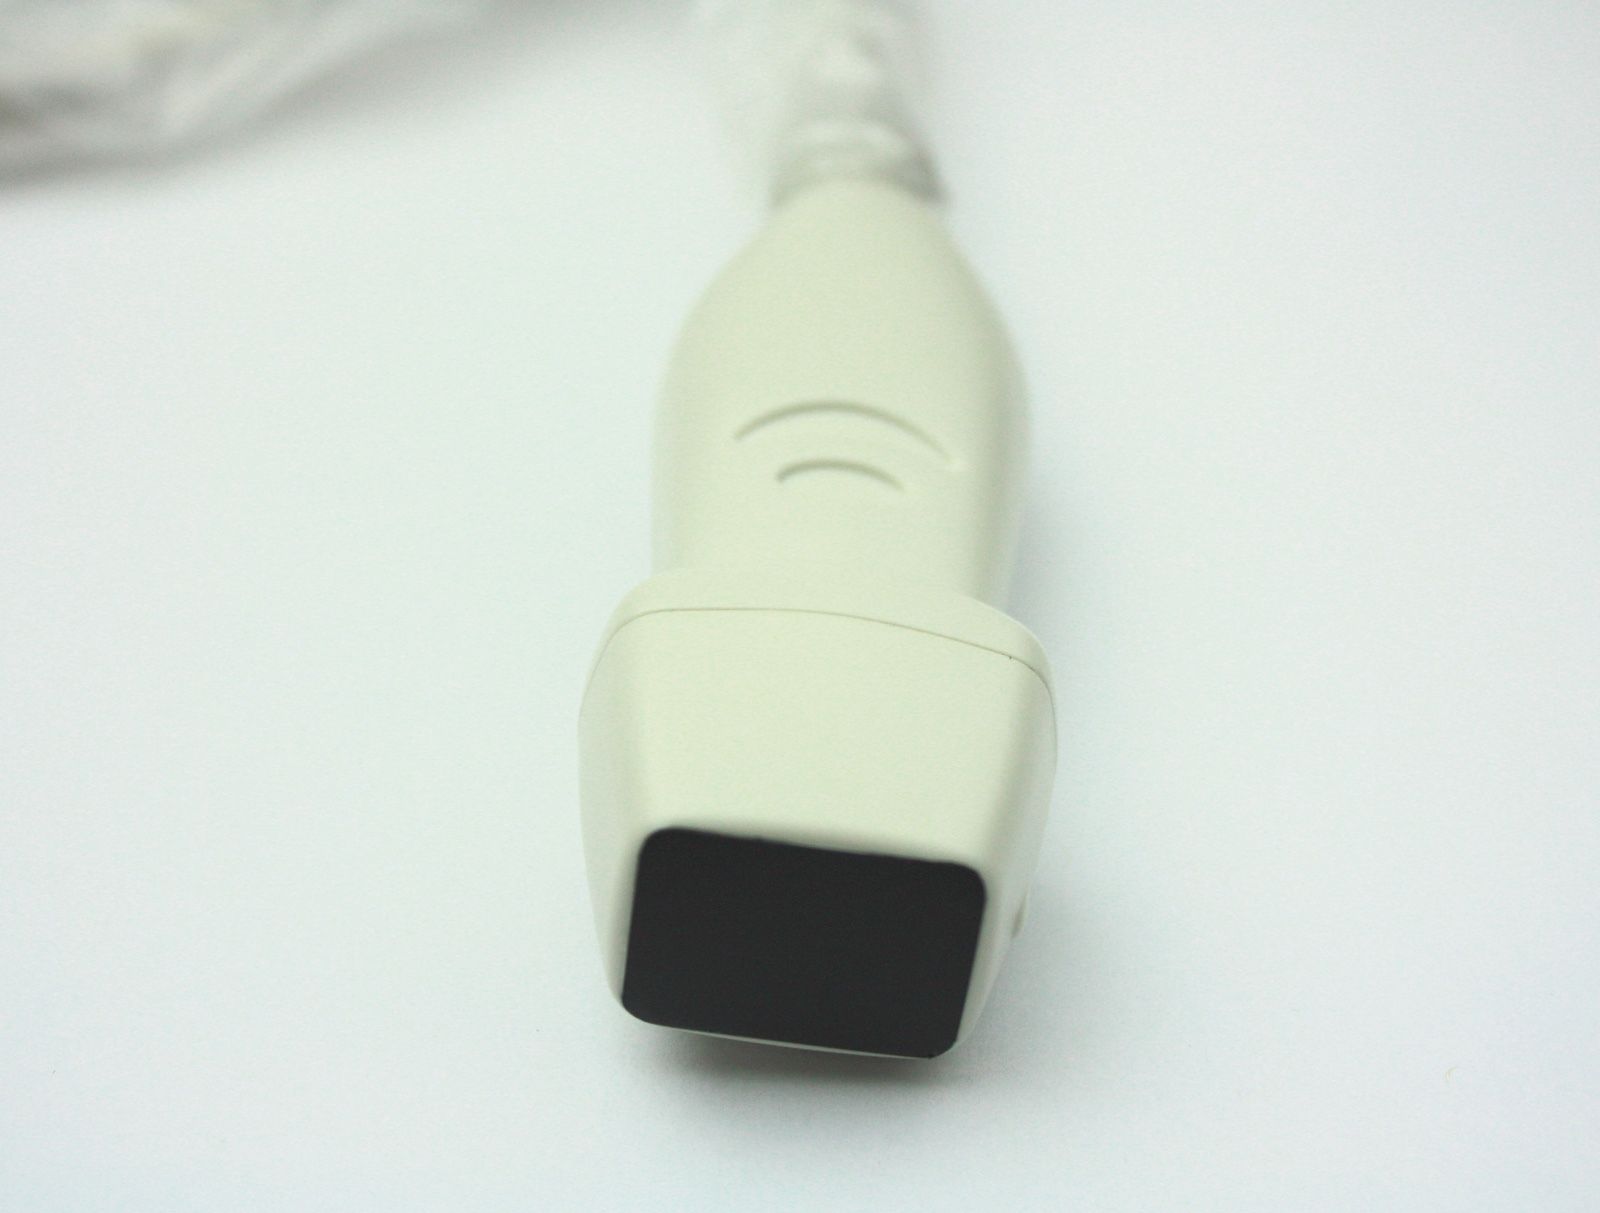 Cardiac Phased Array Probe D3P64L, 2.5-4MHz, For Chison Q Series Ultrasounds DIAGNOSTIC ULTRASOUND MACHINES FOR SALE